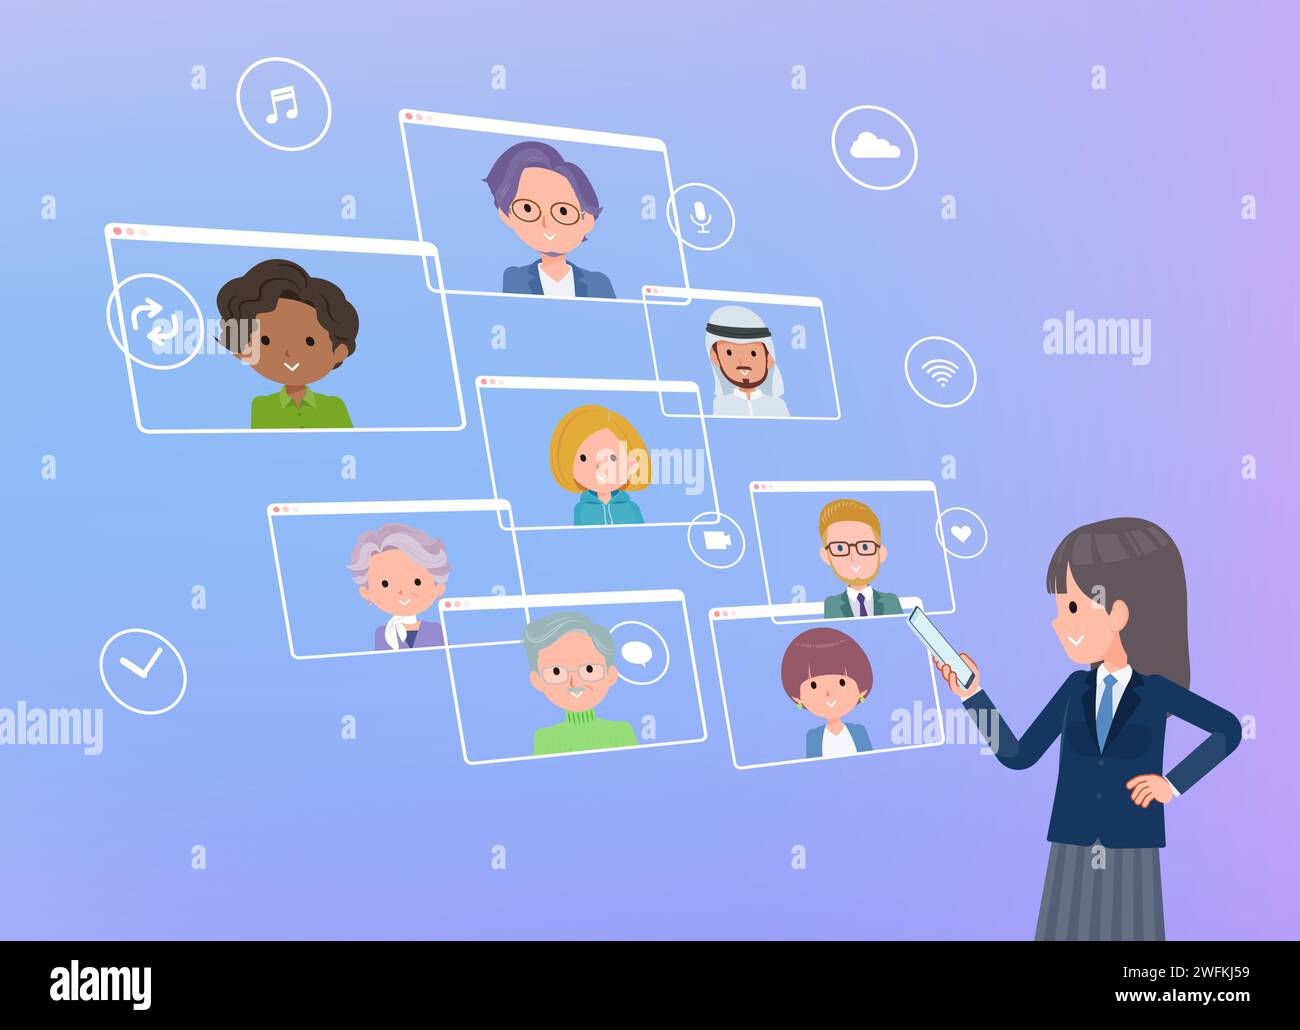 A set of navy blazer student women communicating online using a smartphone.It's vector art so easy to edit. Stock Vector